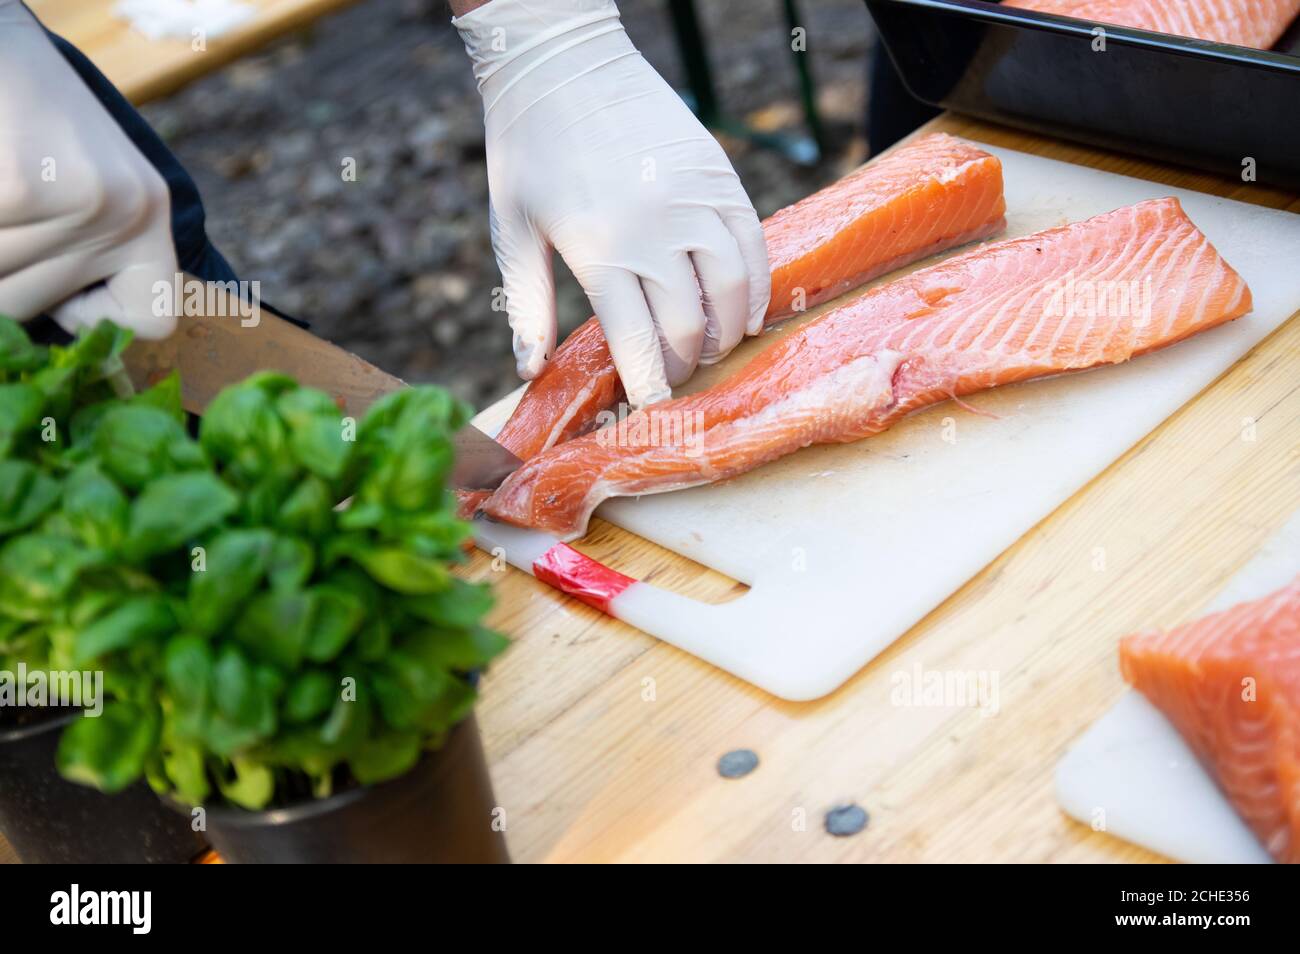 Man hands cutting pink raw salmon with knife on white board Stock Photo